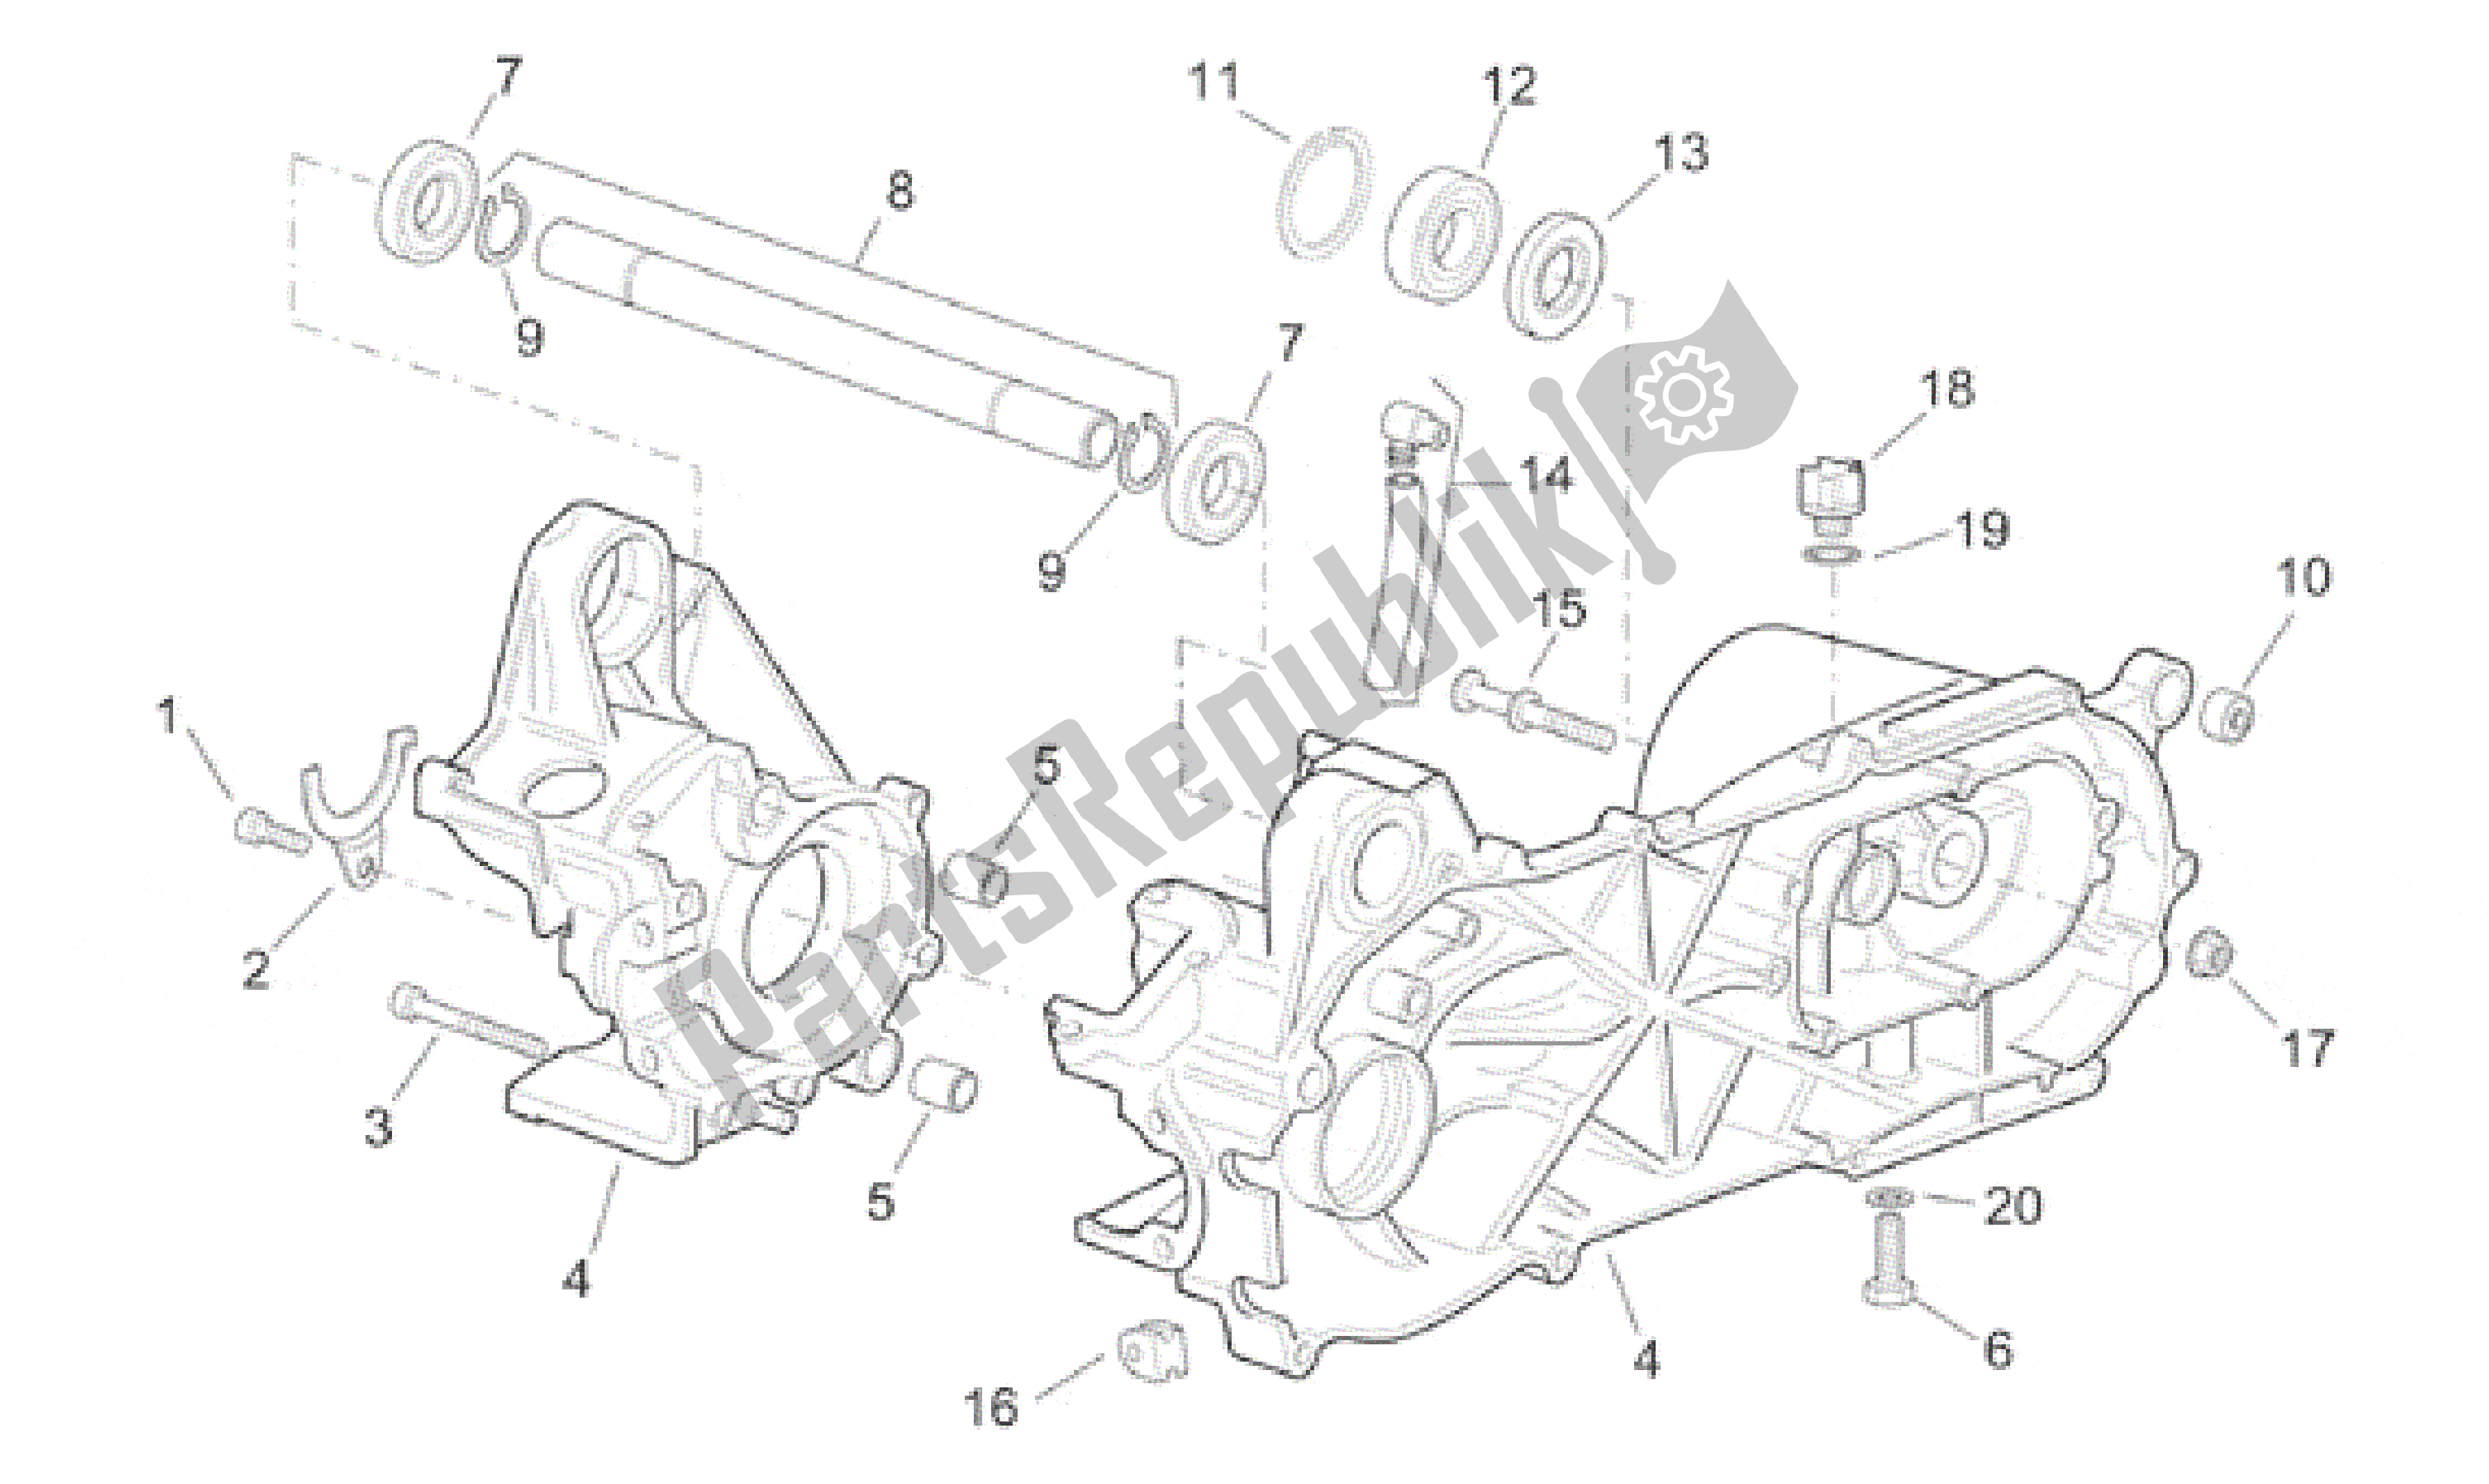 All parts for the Central Crank-case Set of the Aprilia Sonic 50 1998 - 2001